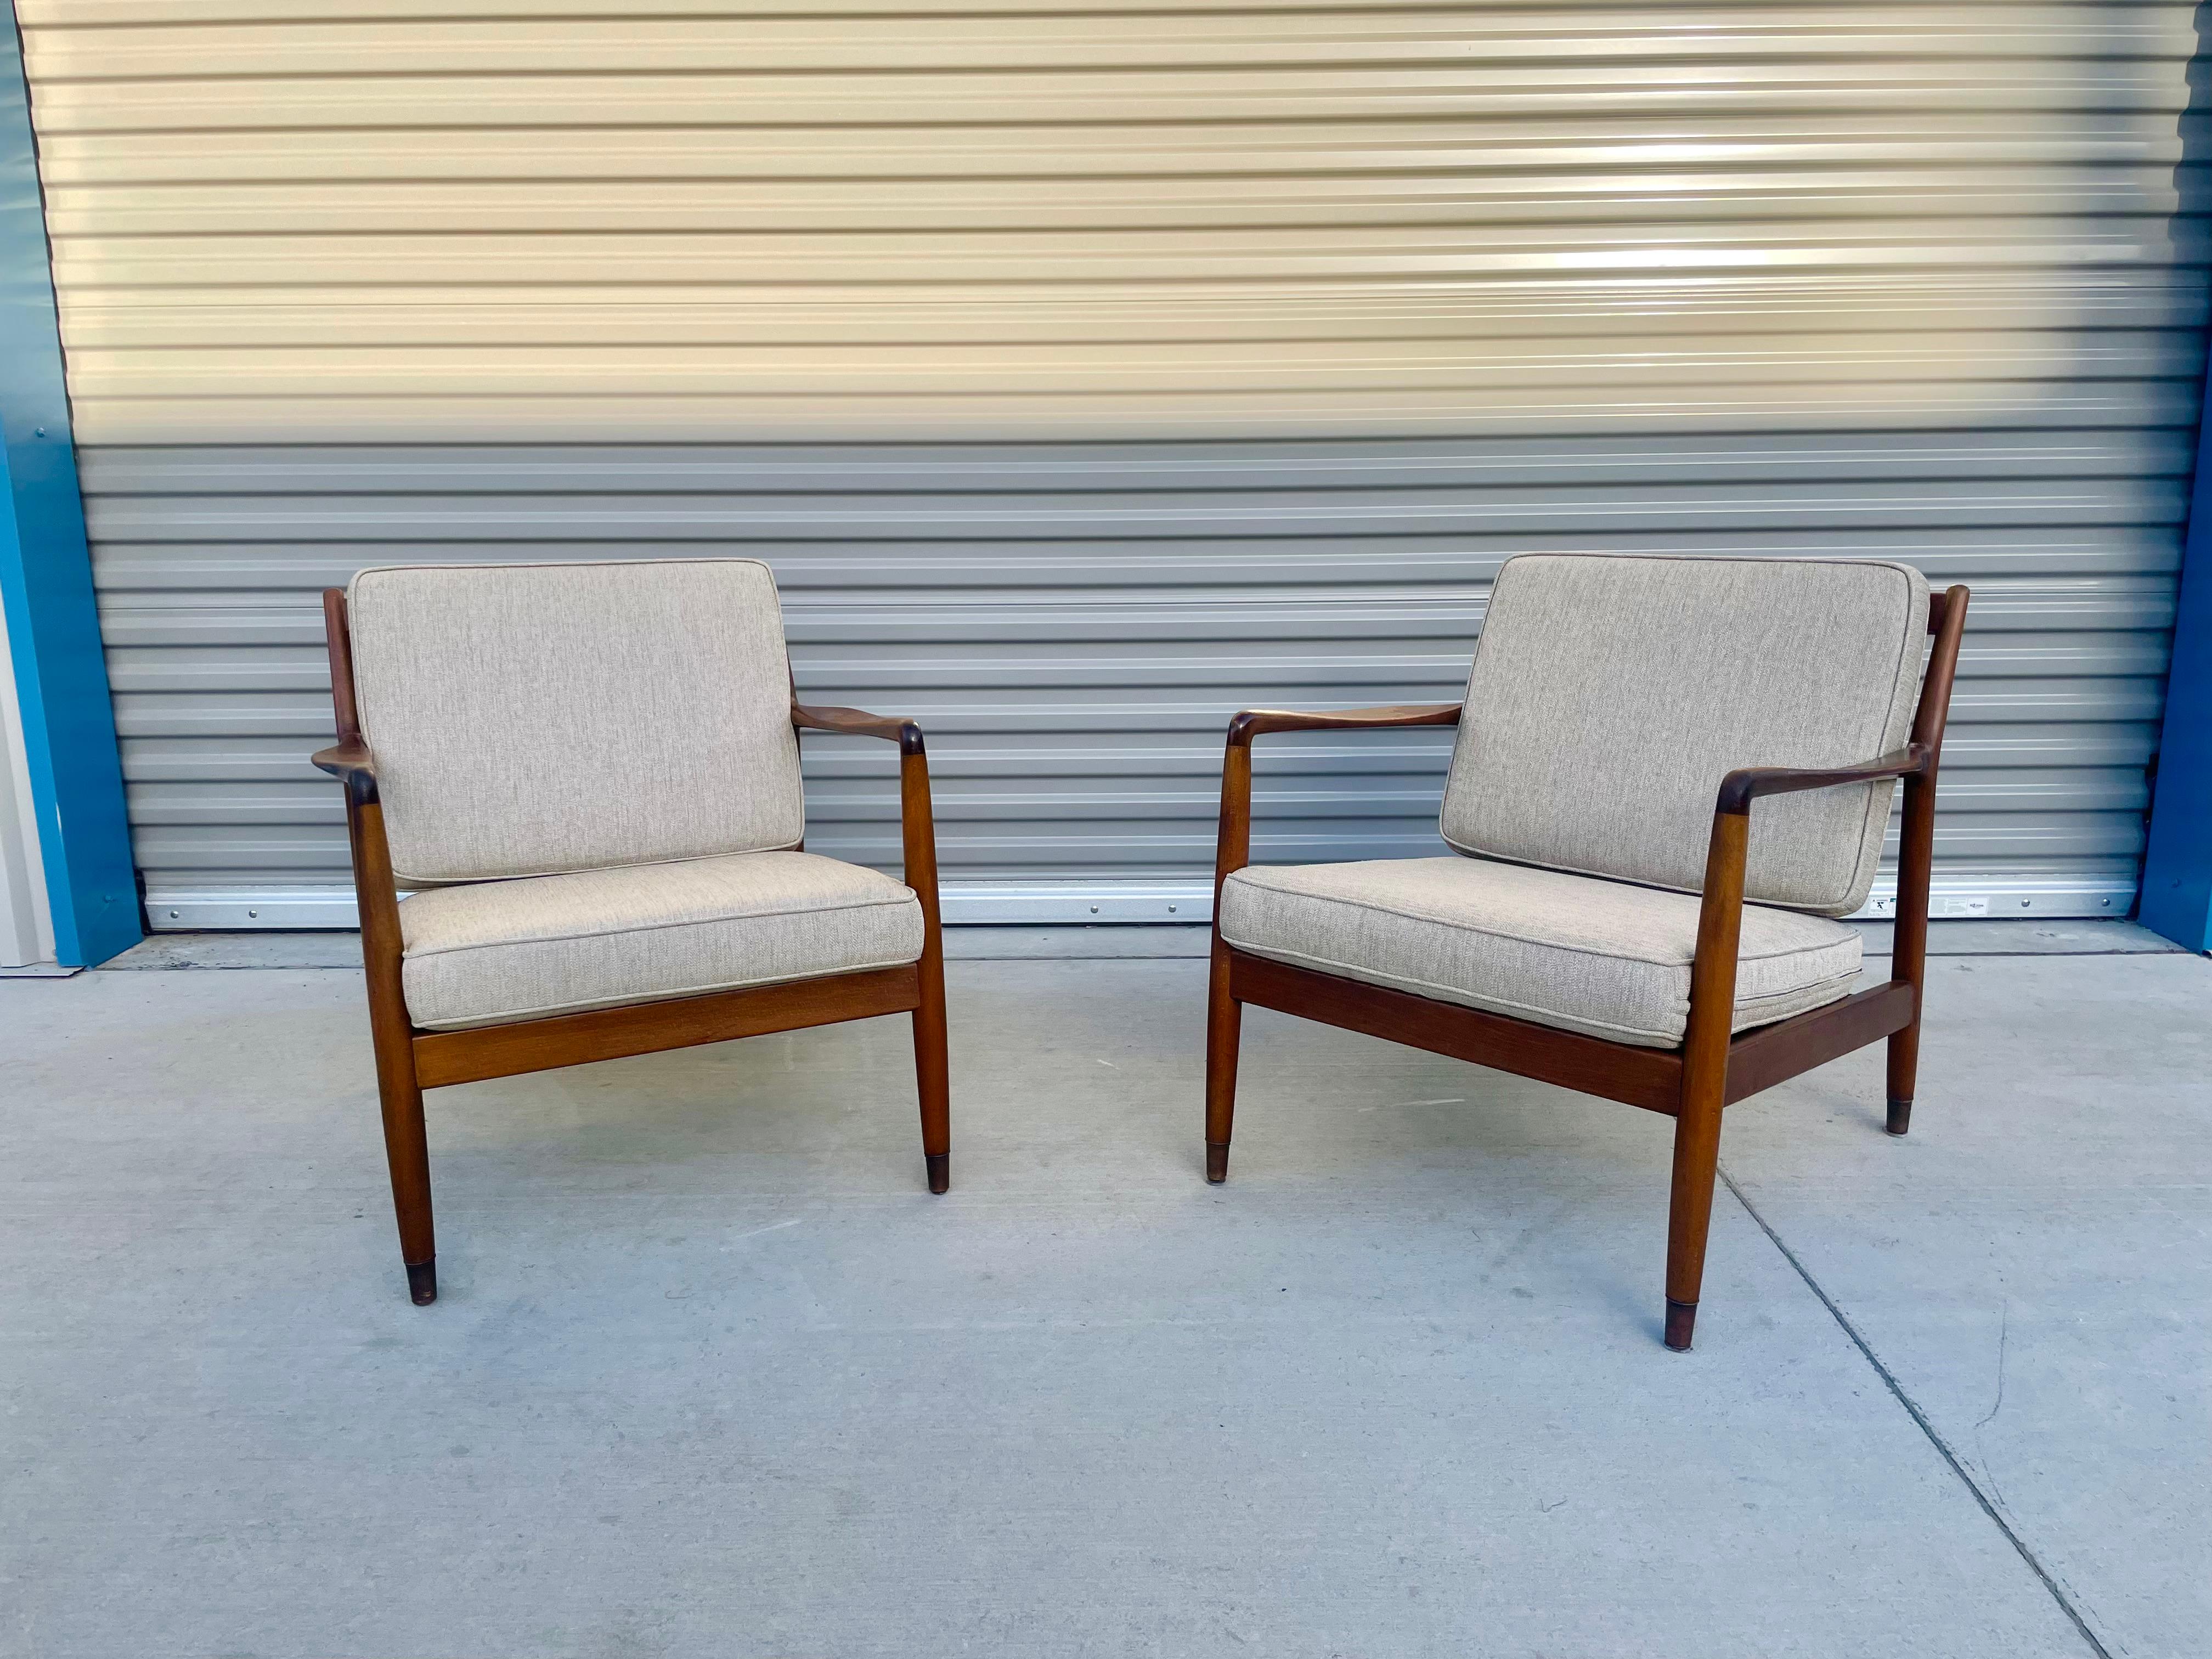 American Vintage Folke Ohlsson Model Usa-143 Lounge Chairs by Dux